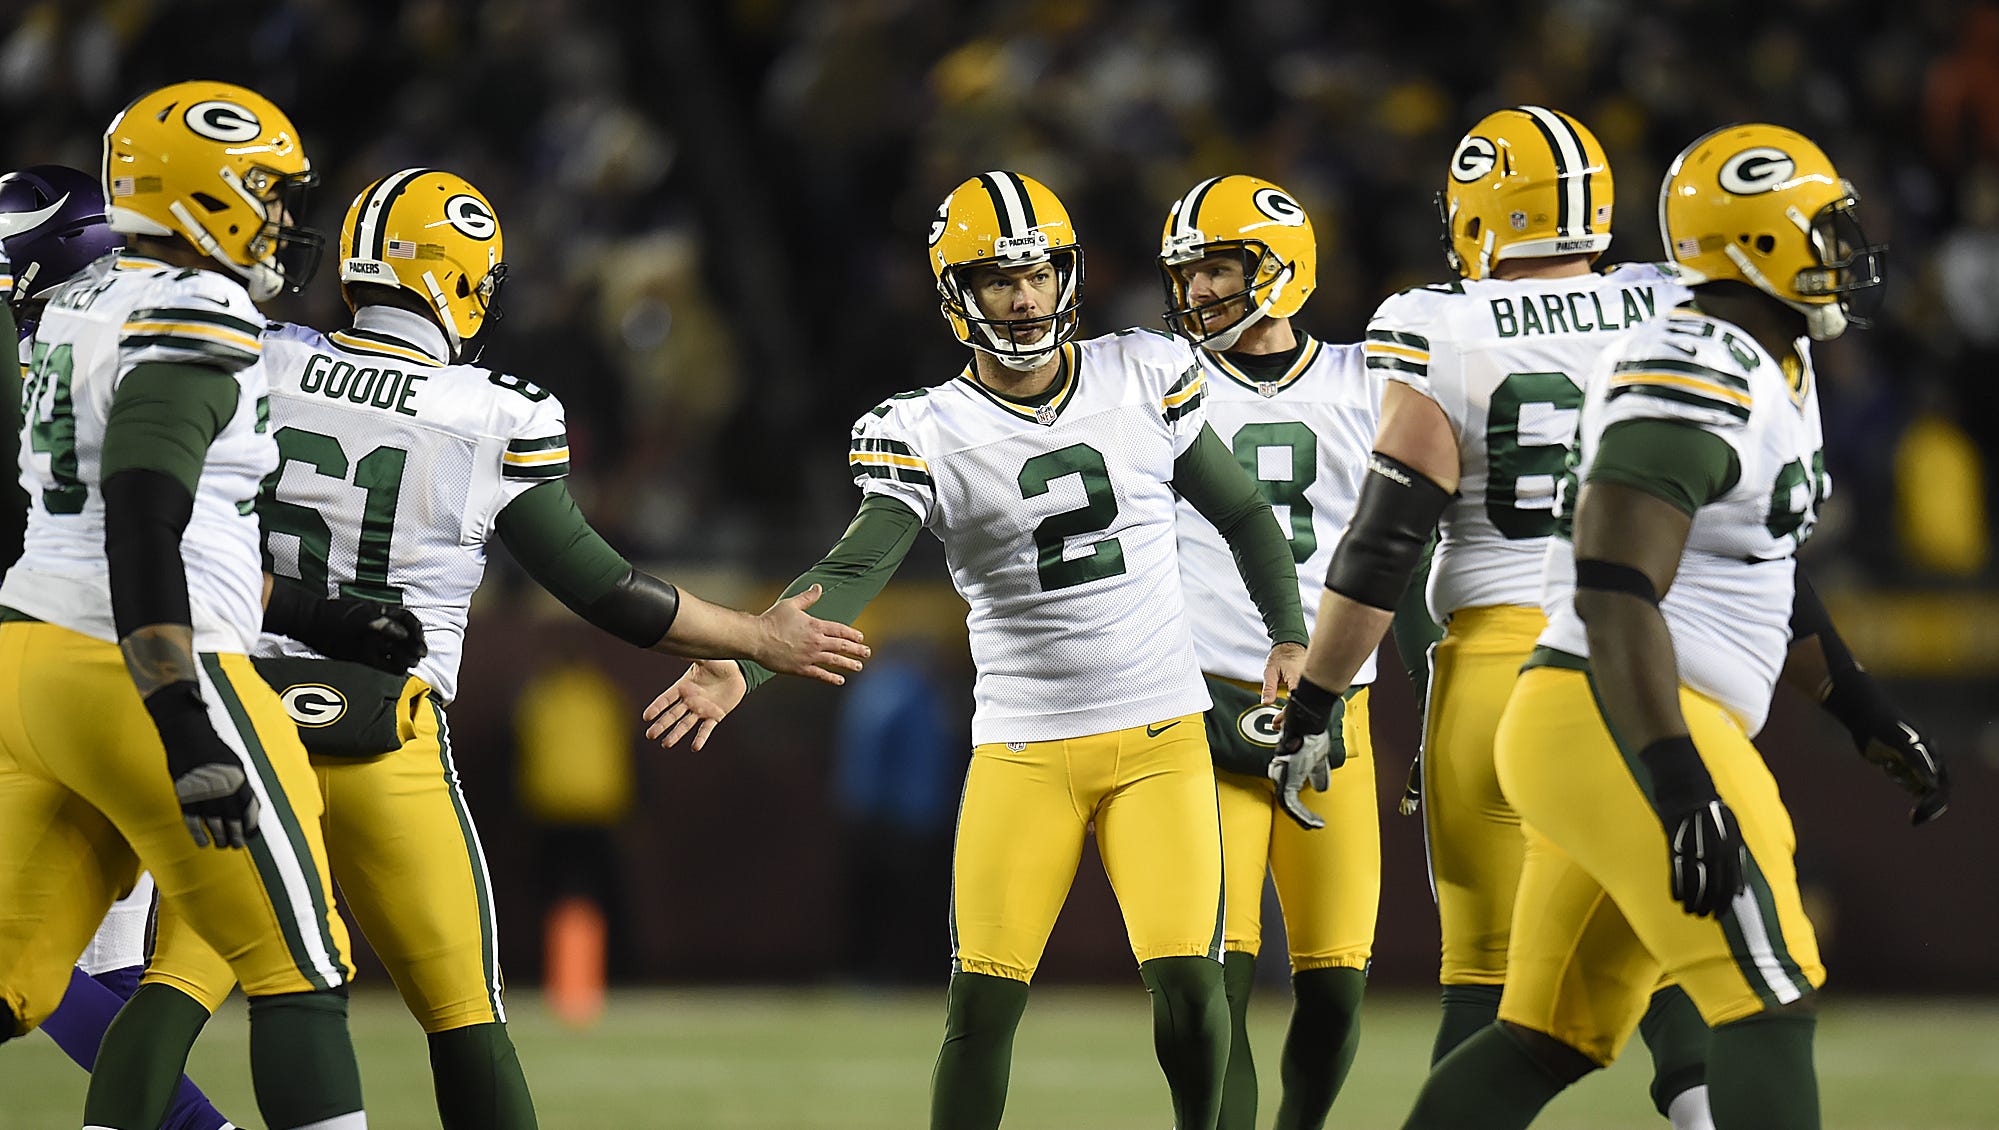 Green Bay Packers kicker Mason Crosby (2) is congratulated by his teammates after Crosby made a field goal against the Minnesota Vikings in the third quarter on Nov. 22, 2015, at TCF Bank Stadium in Minneapolis.